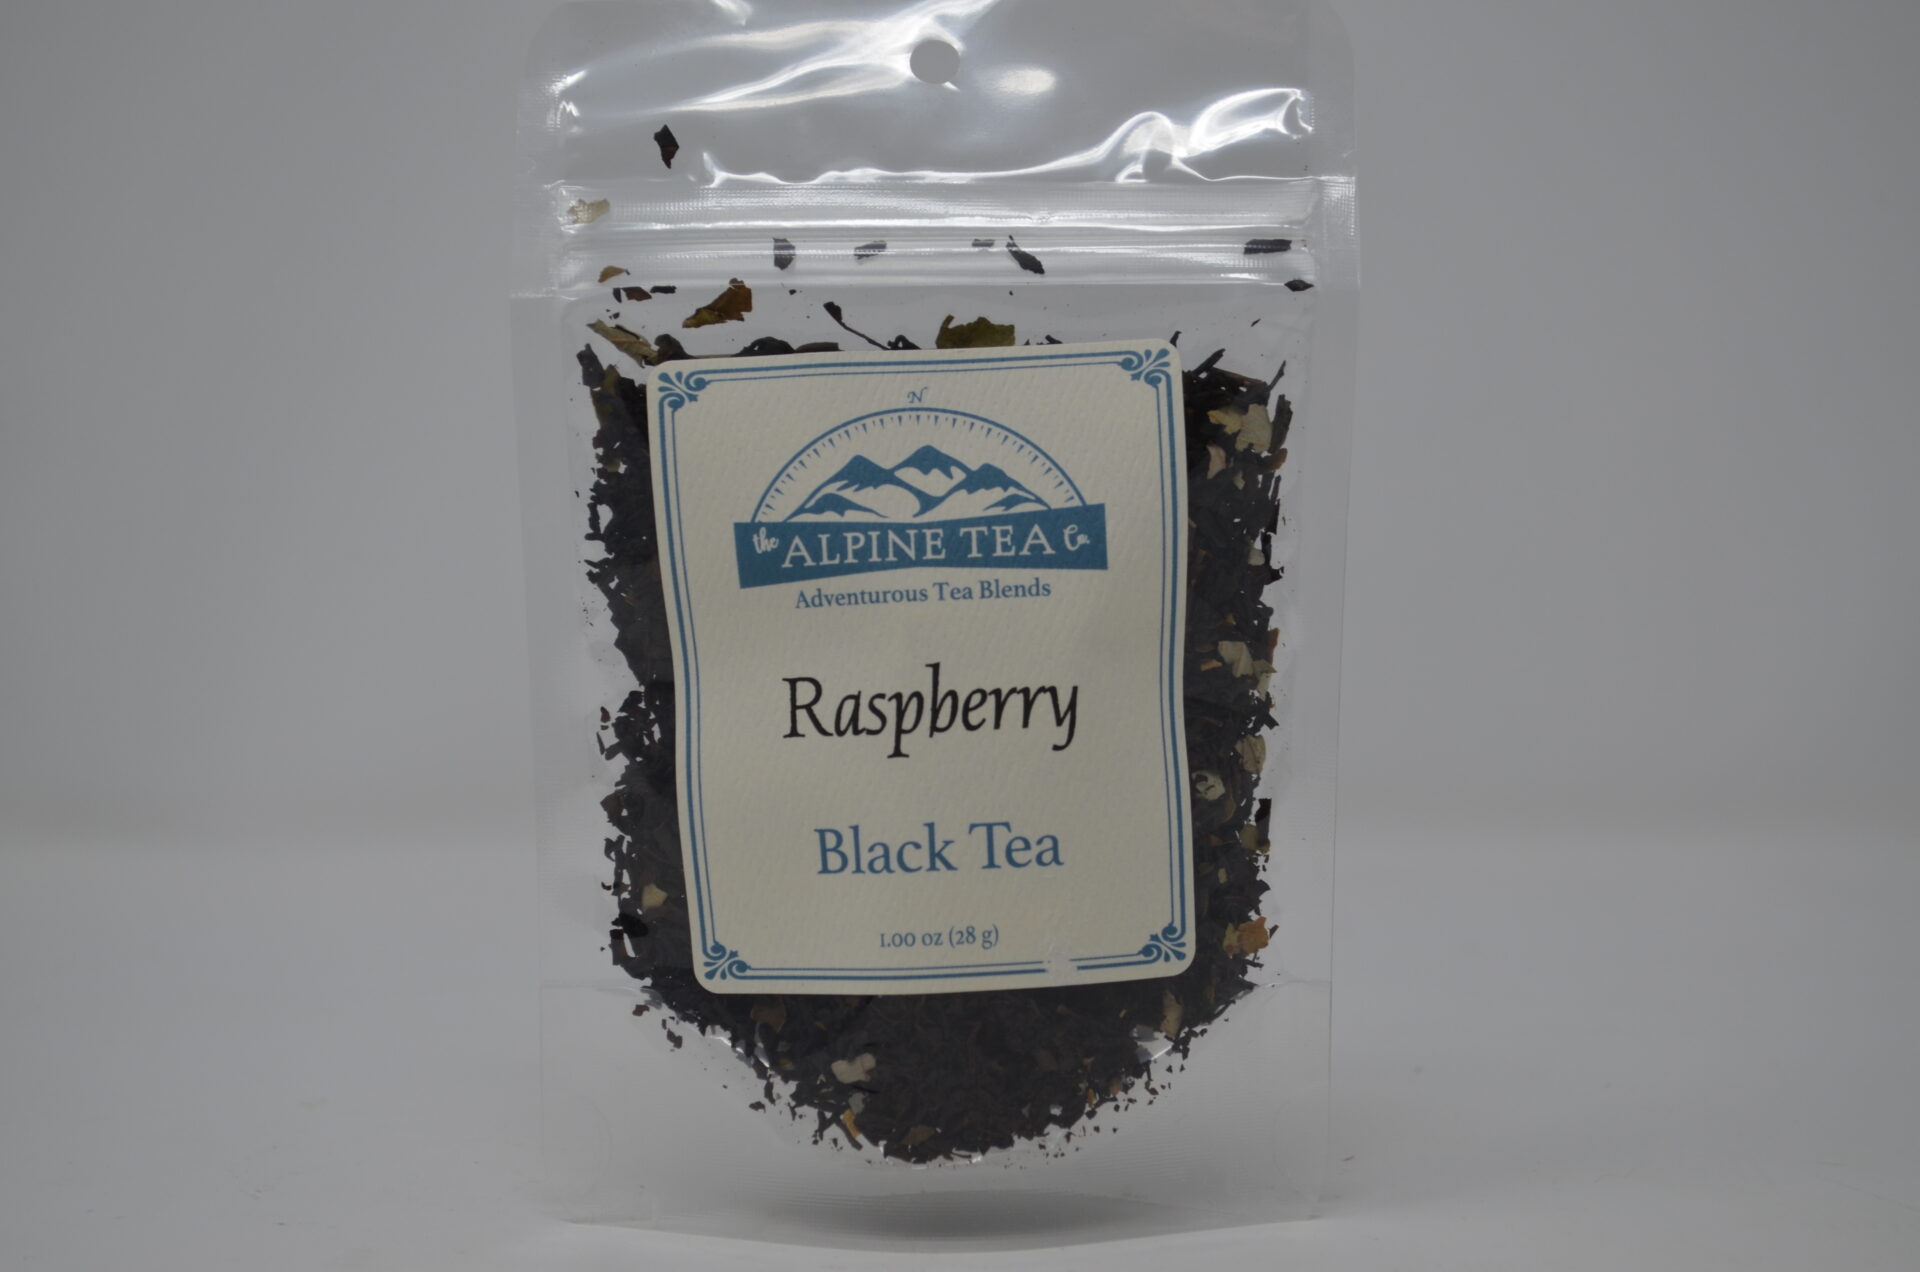 A bag of tea is shown with the label.